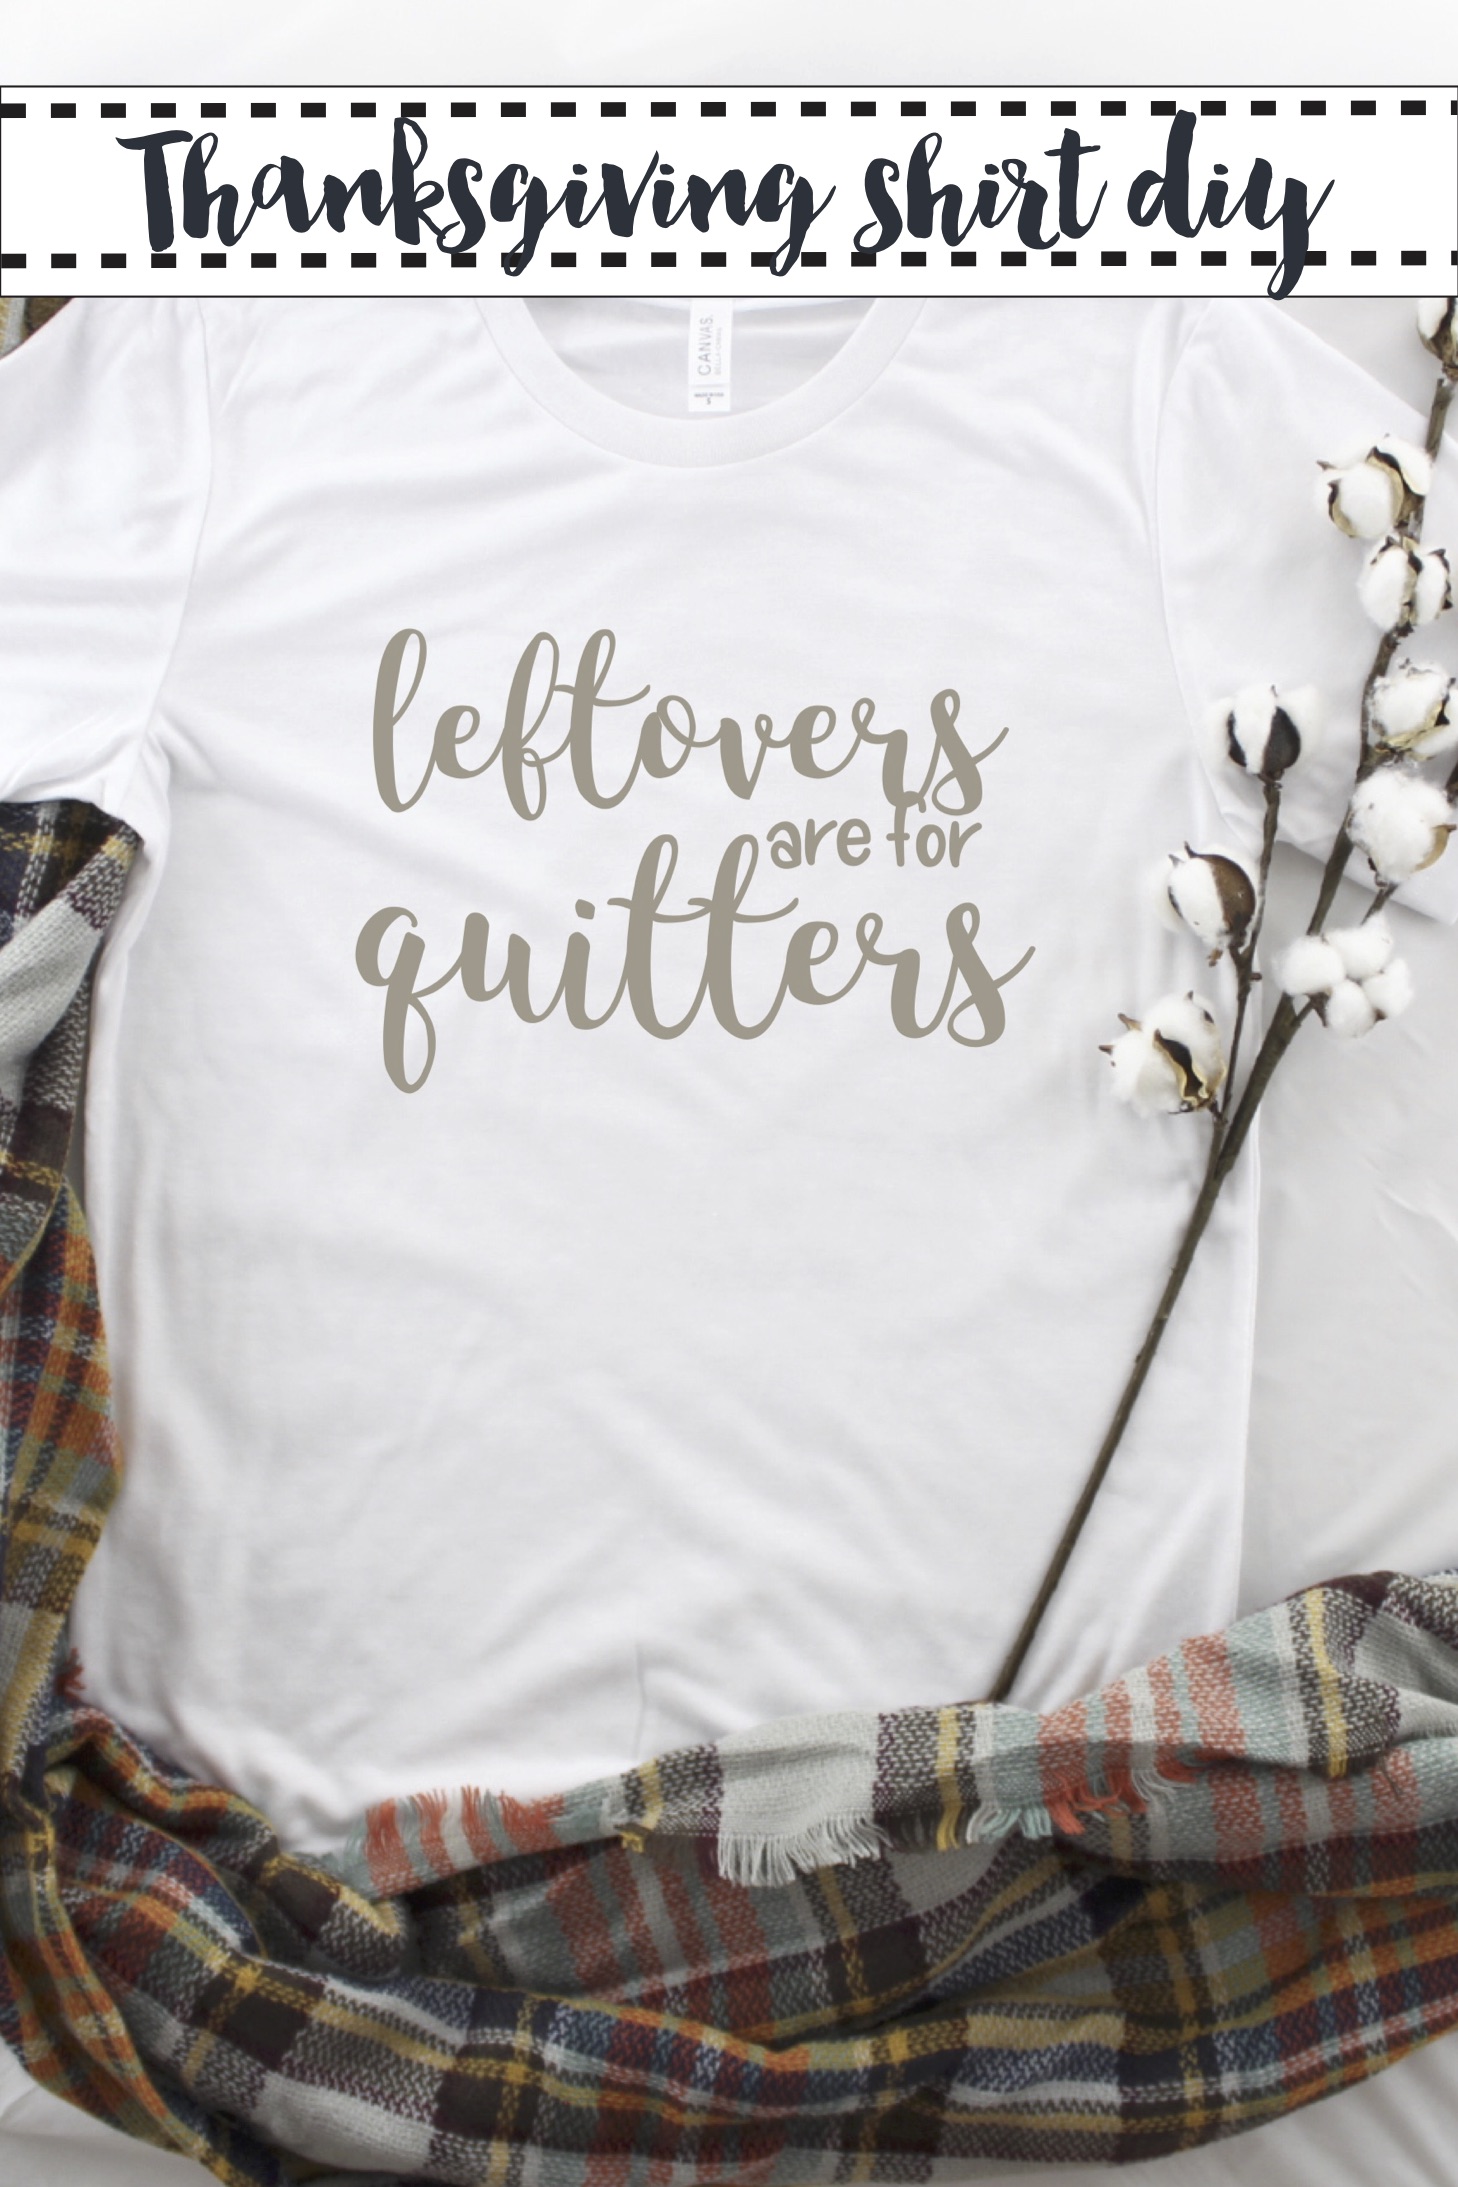 Leftovers are for Quitters shirt Cotton Stem